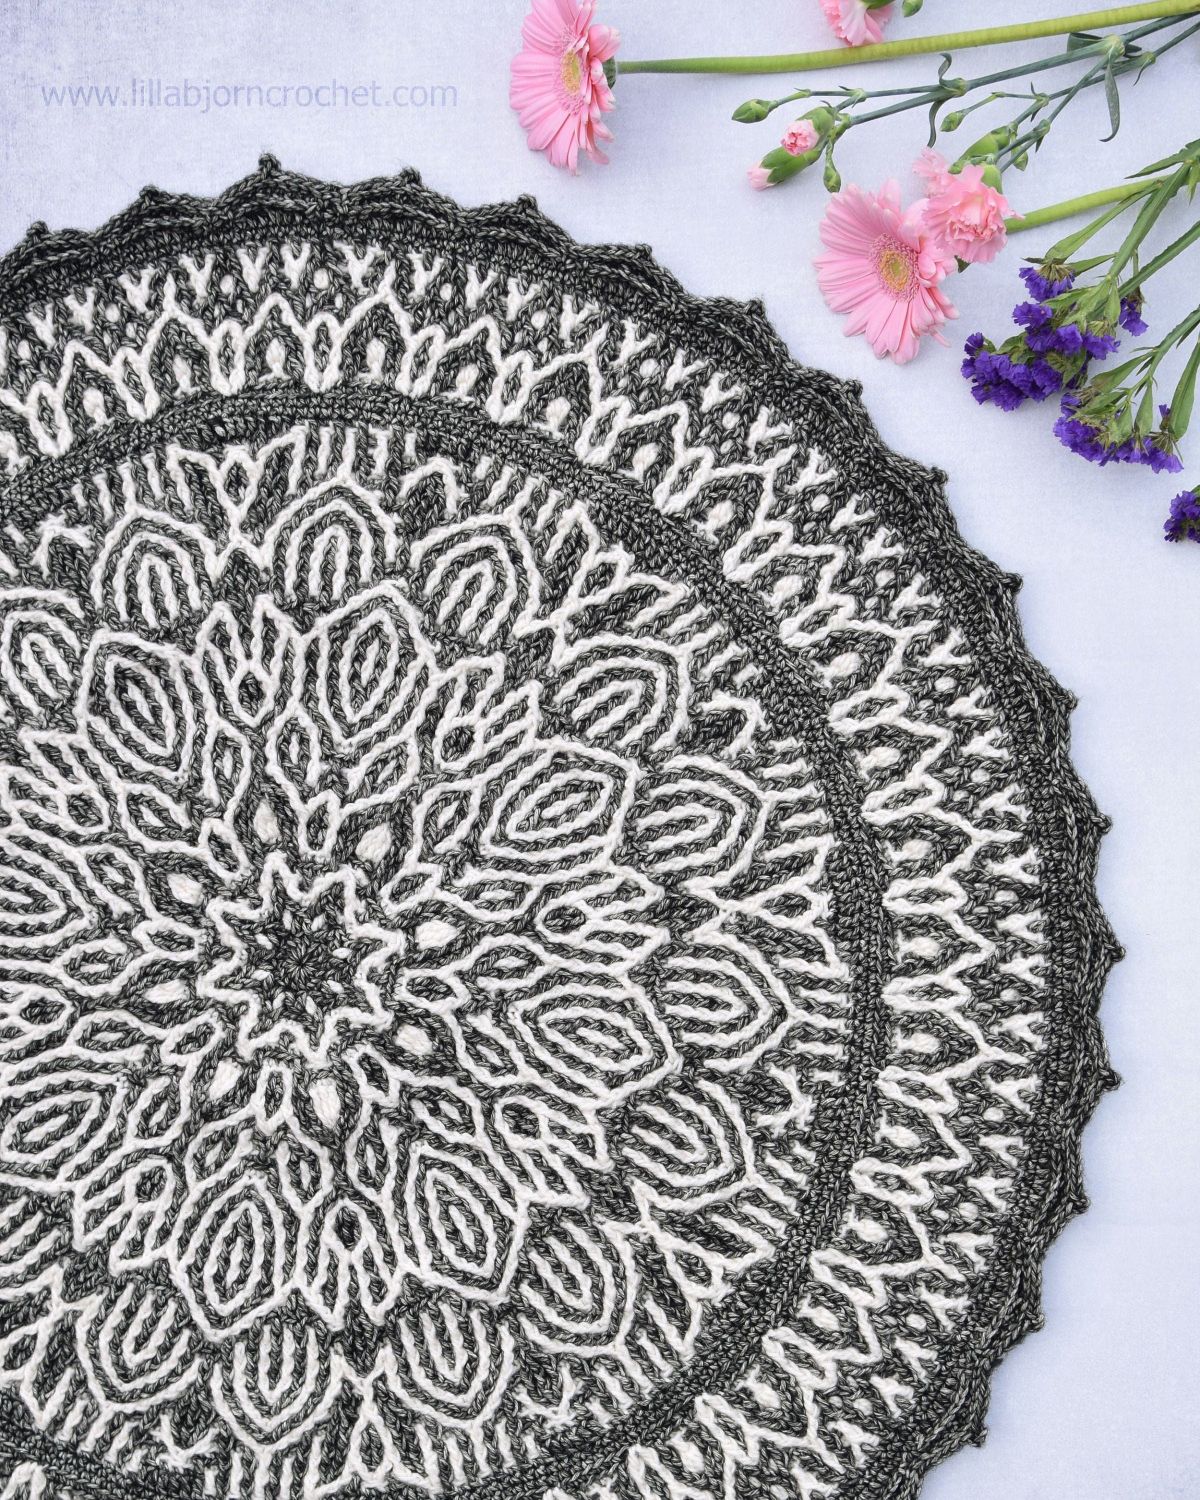 Gray and white round mandala with petal-like designs moving outwards to a narrow gray trim on a white background with pink and purple flowers.